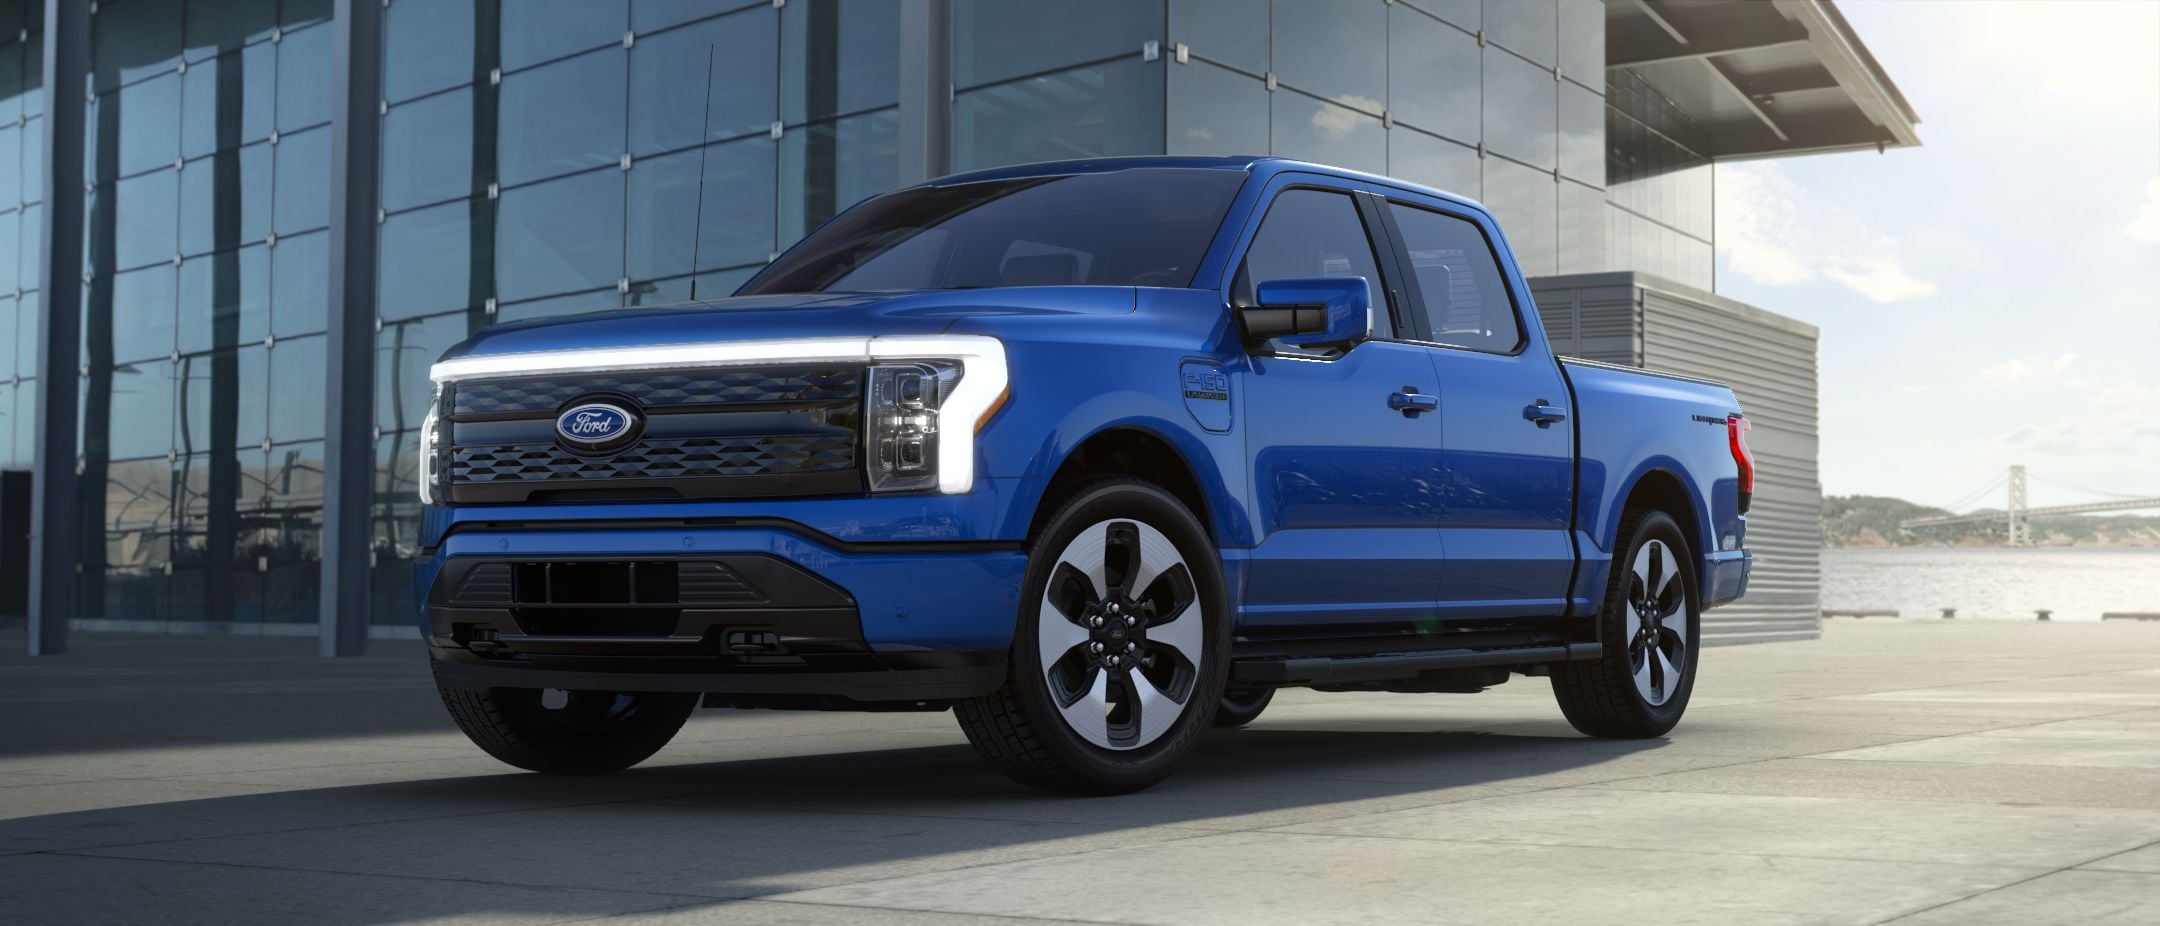 2022 Ford F-150® Lightning™ All-Electric Truck | Pricing, Photos, Specs &  More | Ford.com